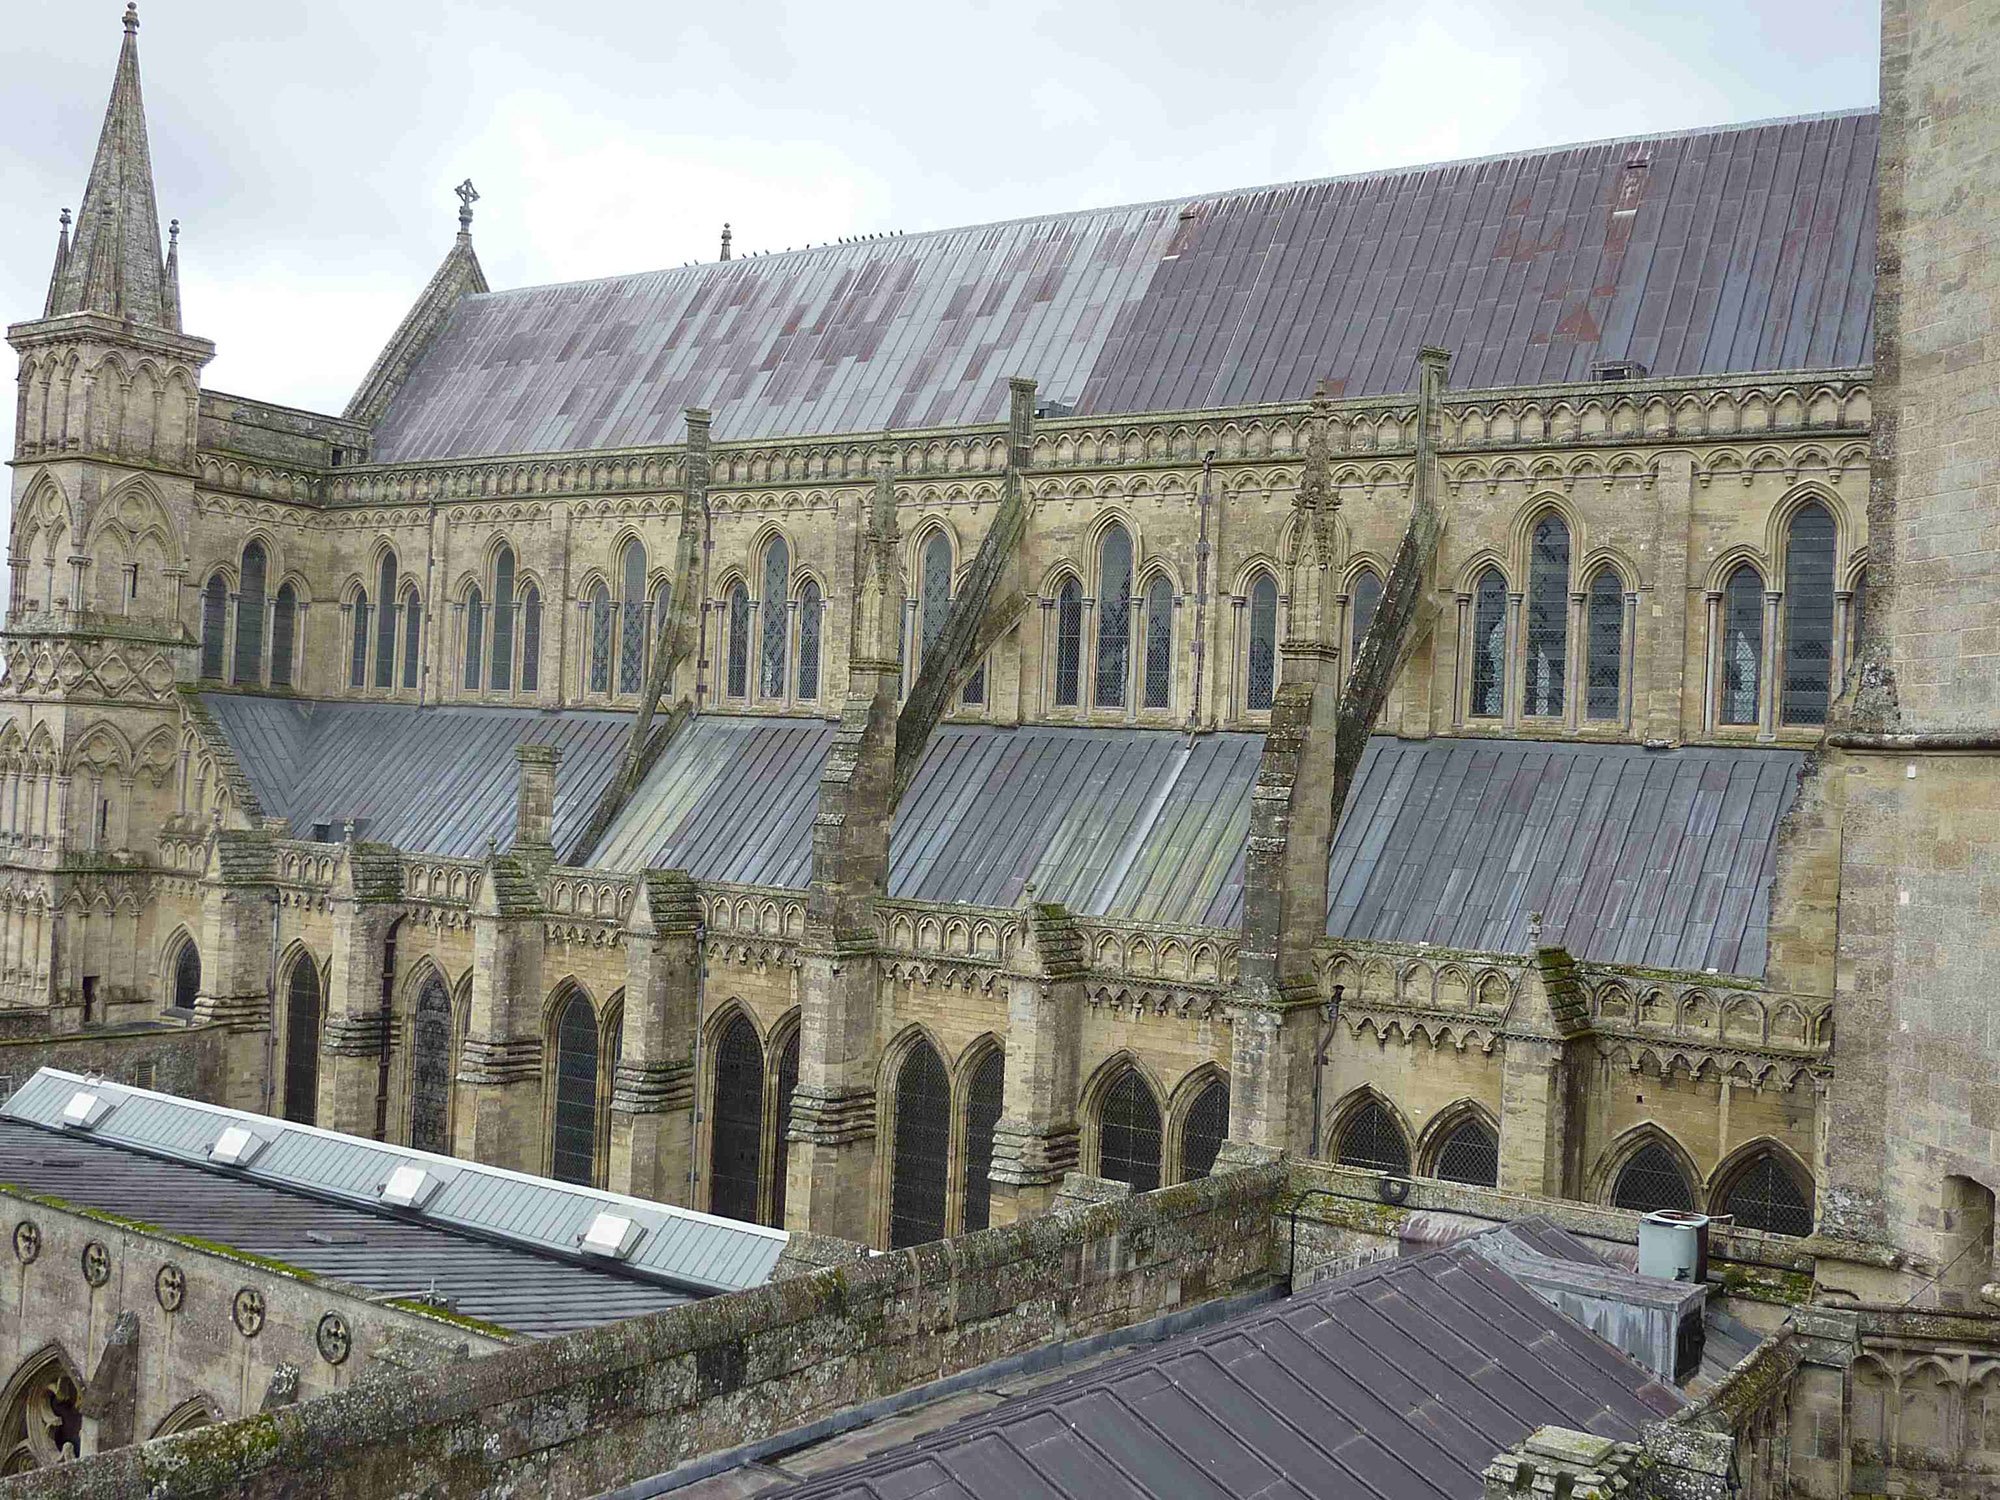 A large church building with lead roofing.